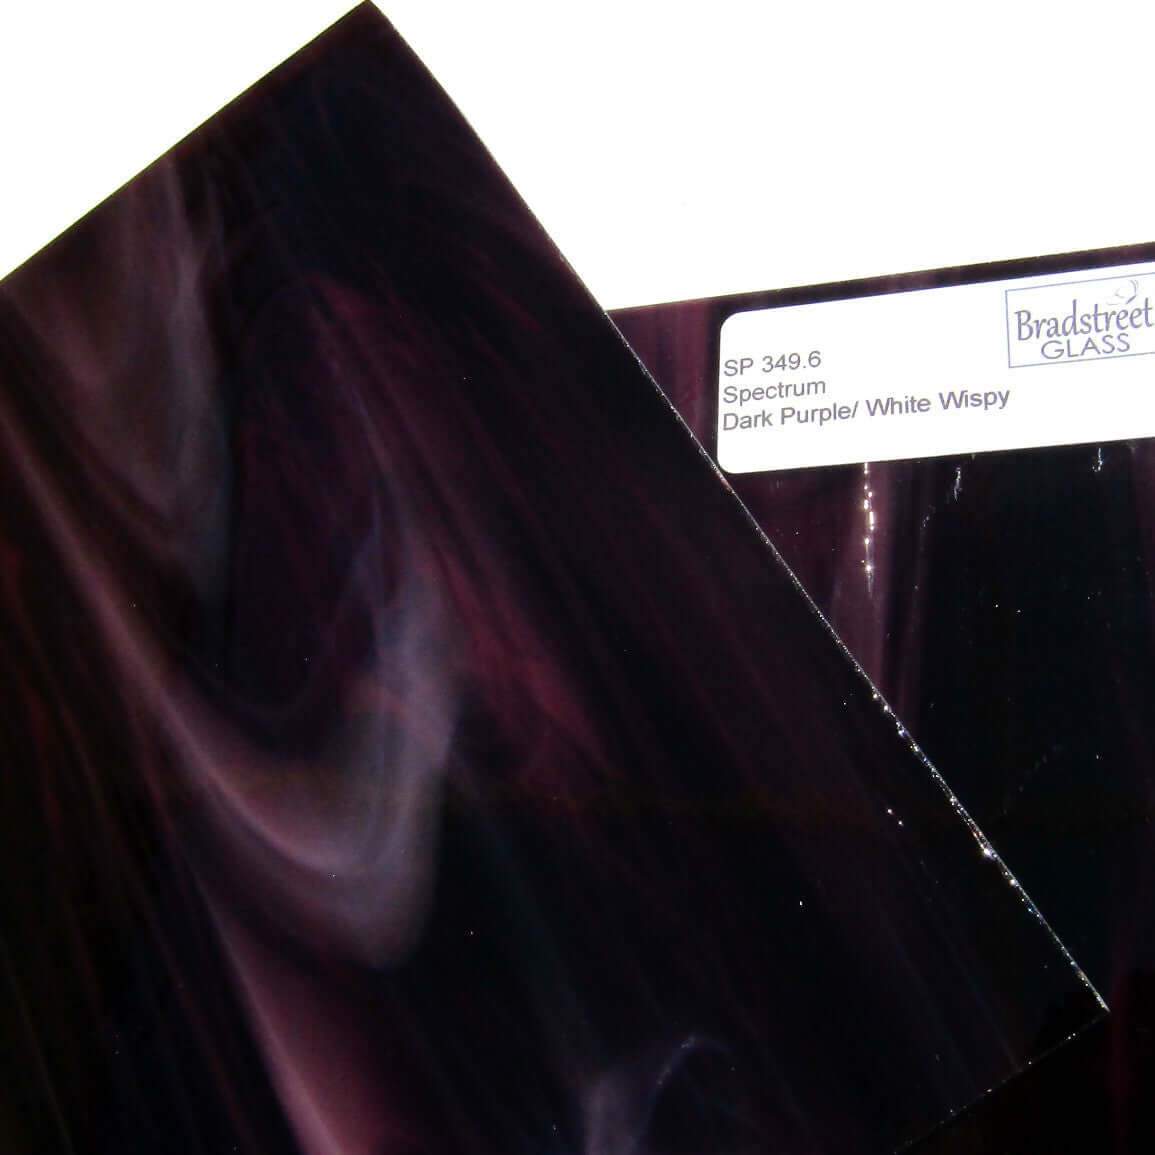 Dark Purple and White Stained Glass Sheet Opaque Spectrum 349.6